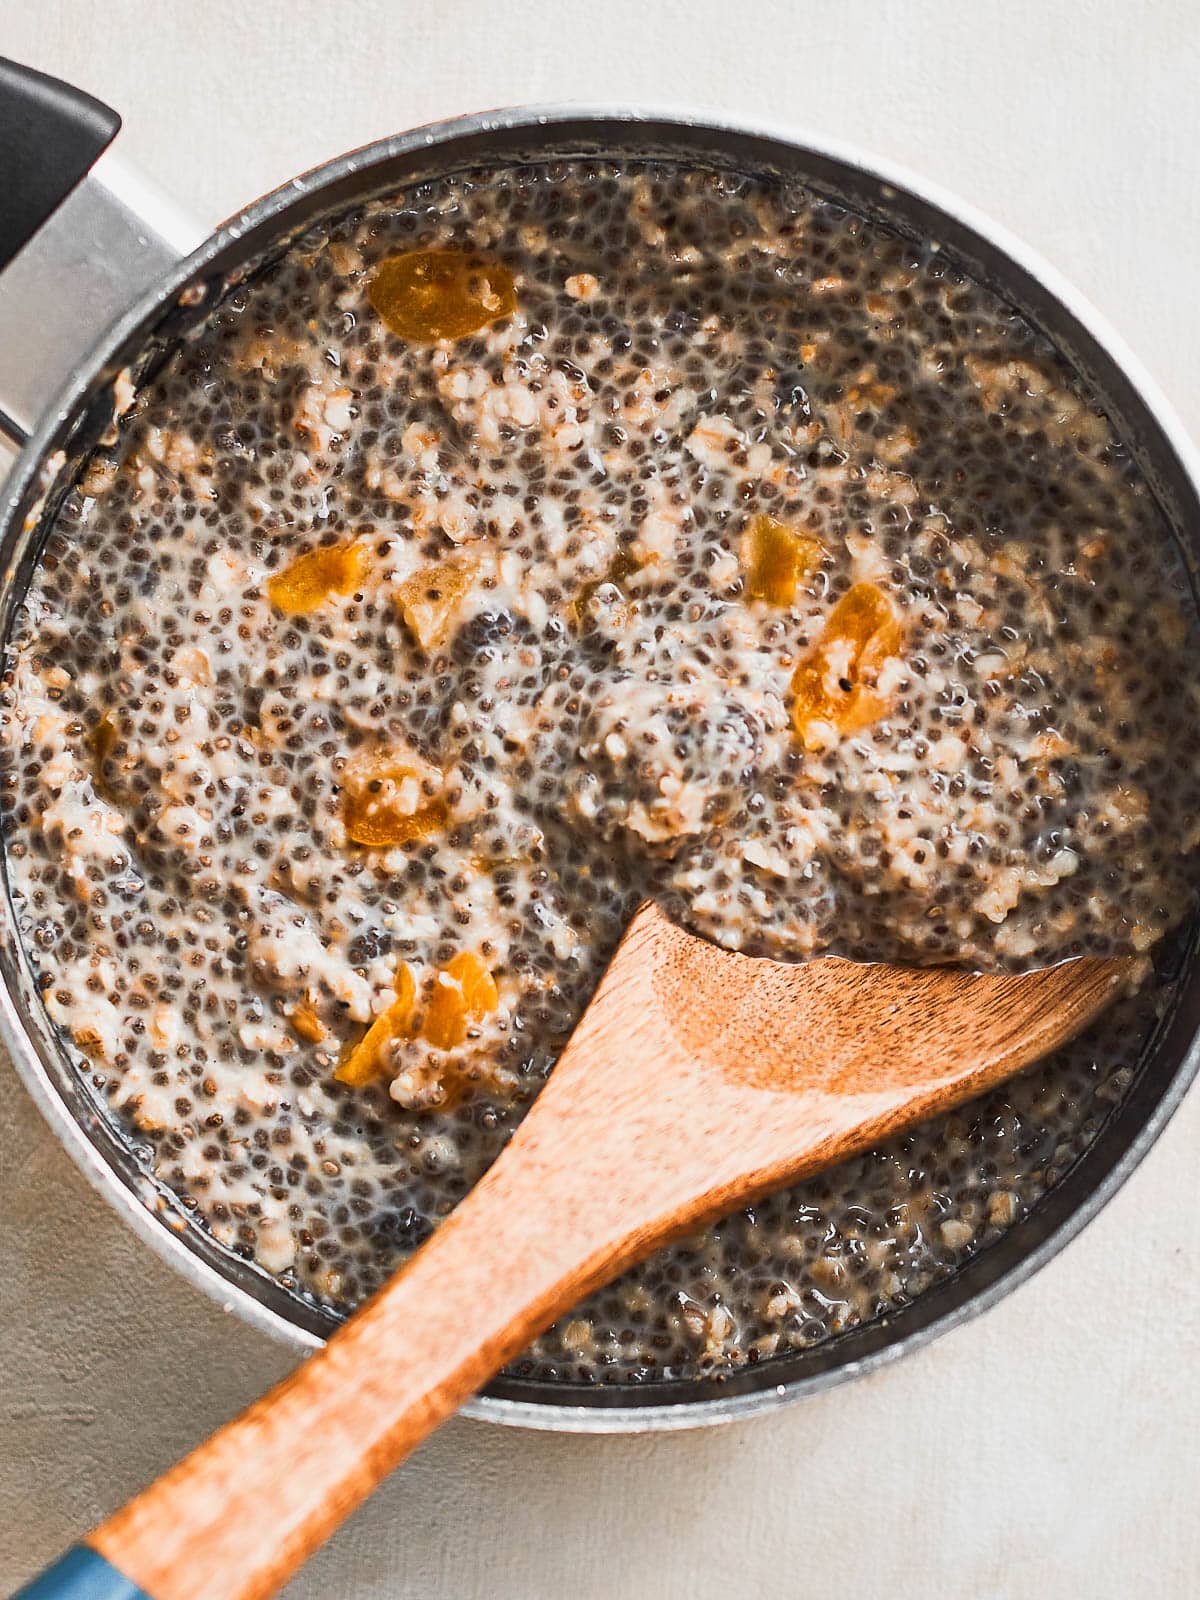 Chia seed porridge being stirred whilst cooking in the pan